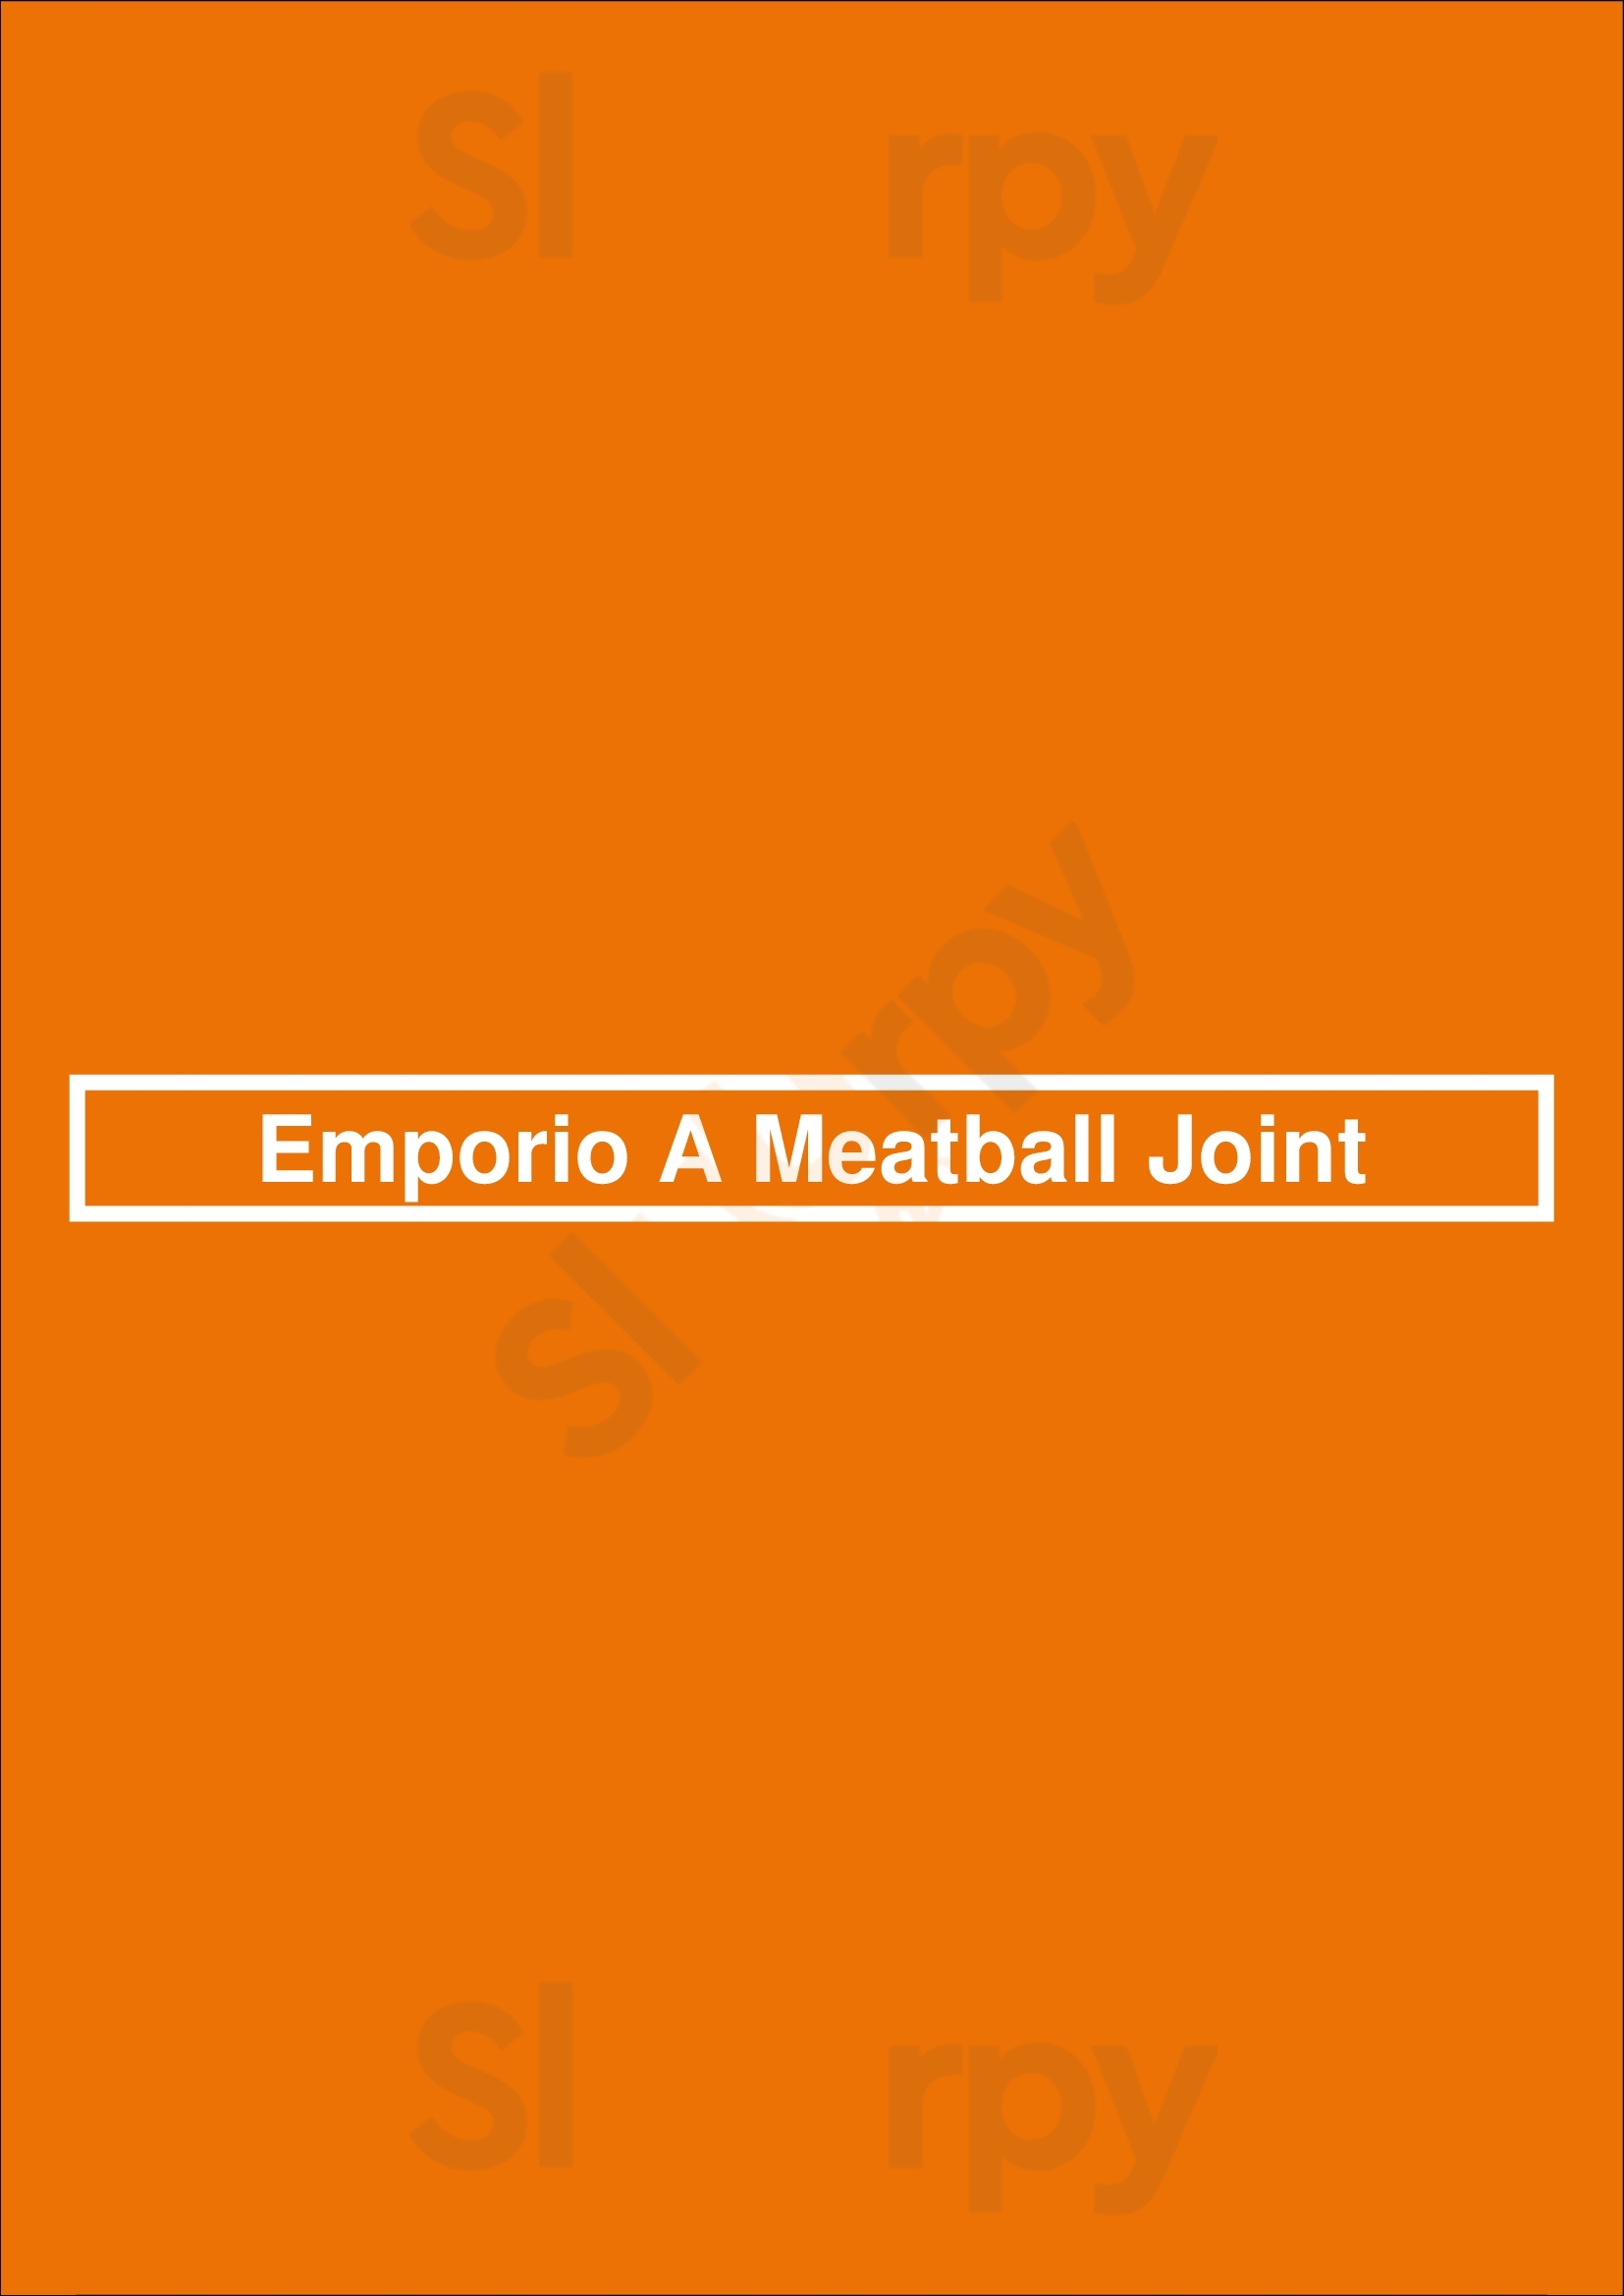 Emporio A Meatball Joint Pittsburgh Menu - 1